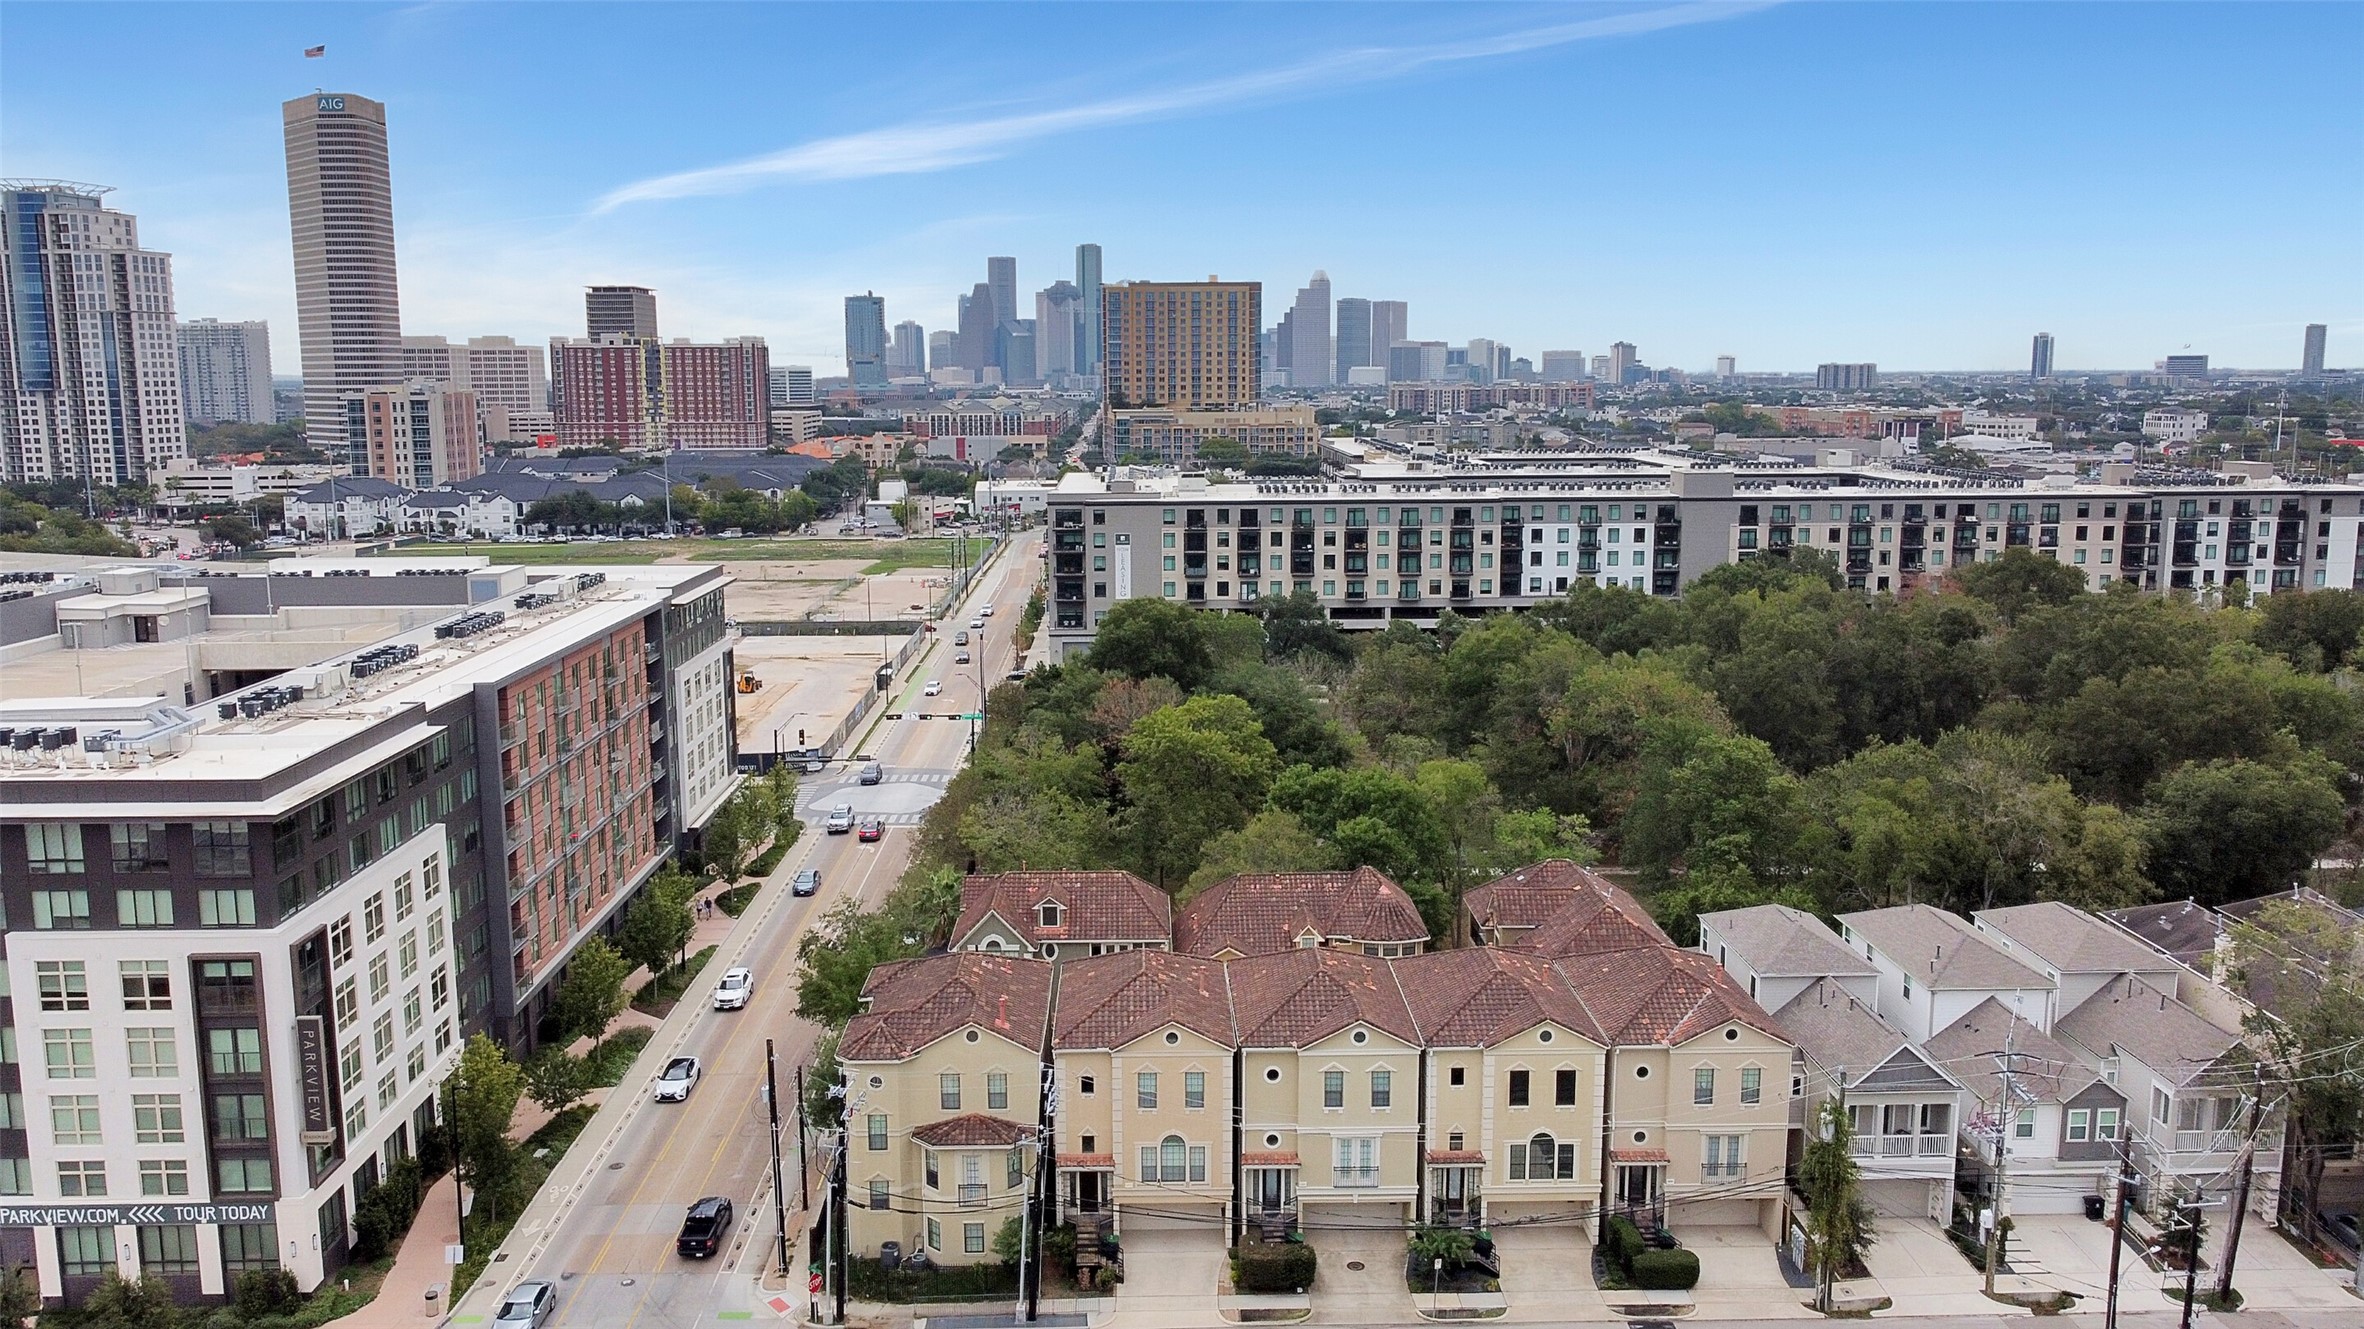 BREATHTAKING VIEWS OF DOWNTOWN HOUSTON CAN BE ENJOYED FROM THE PRIVACY OF YOUR EXECUTIVE HOME.